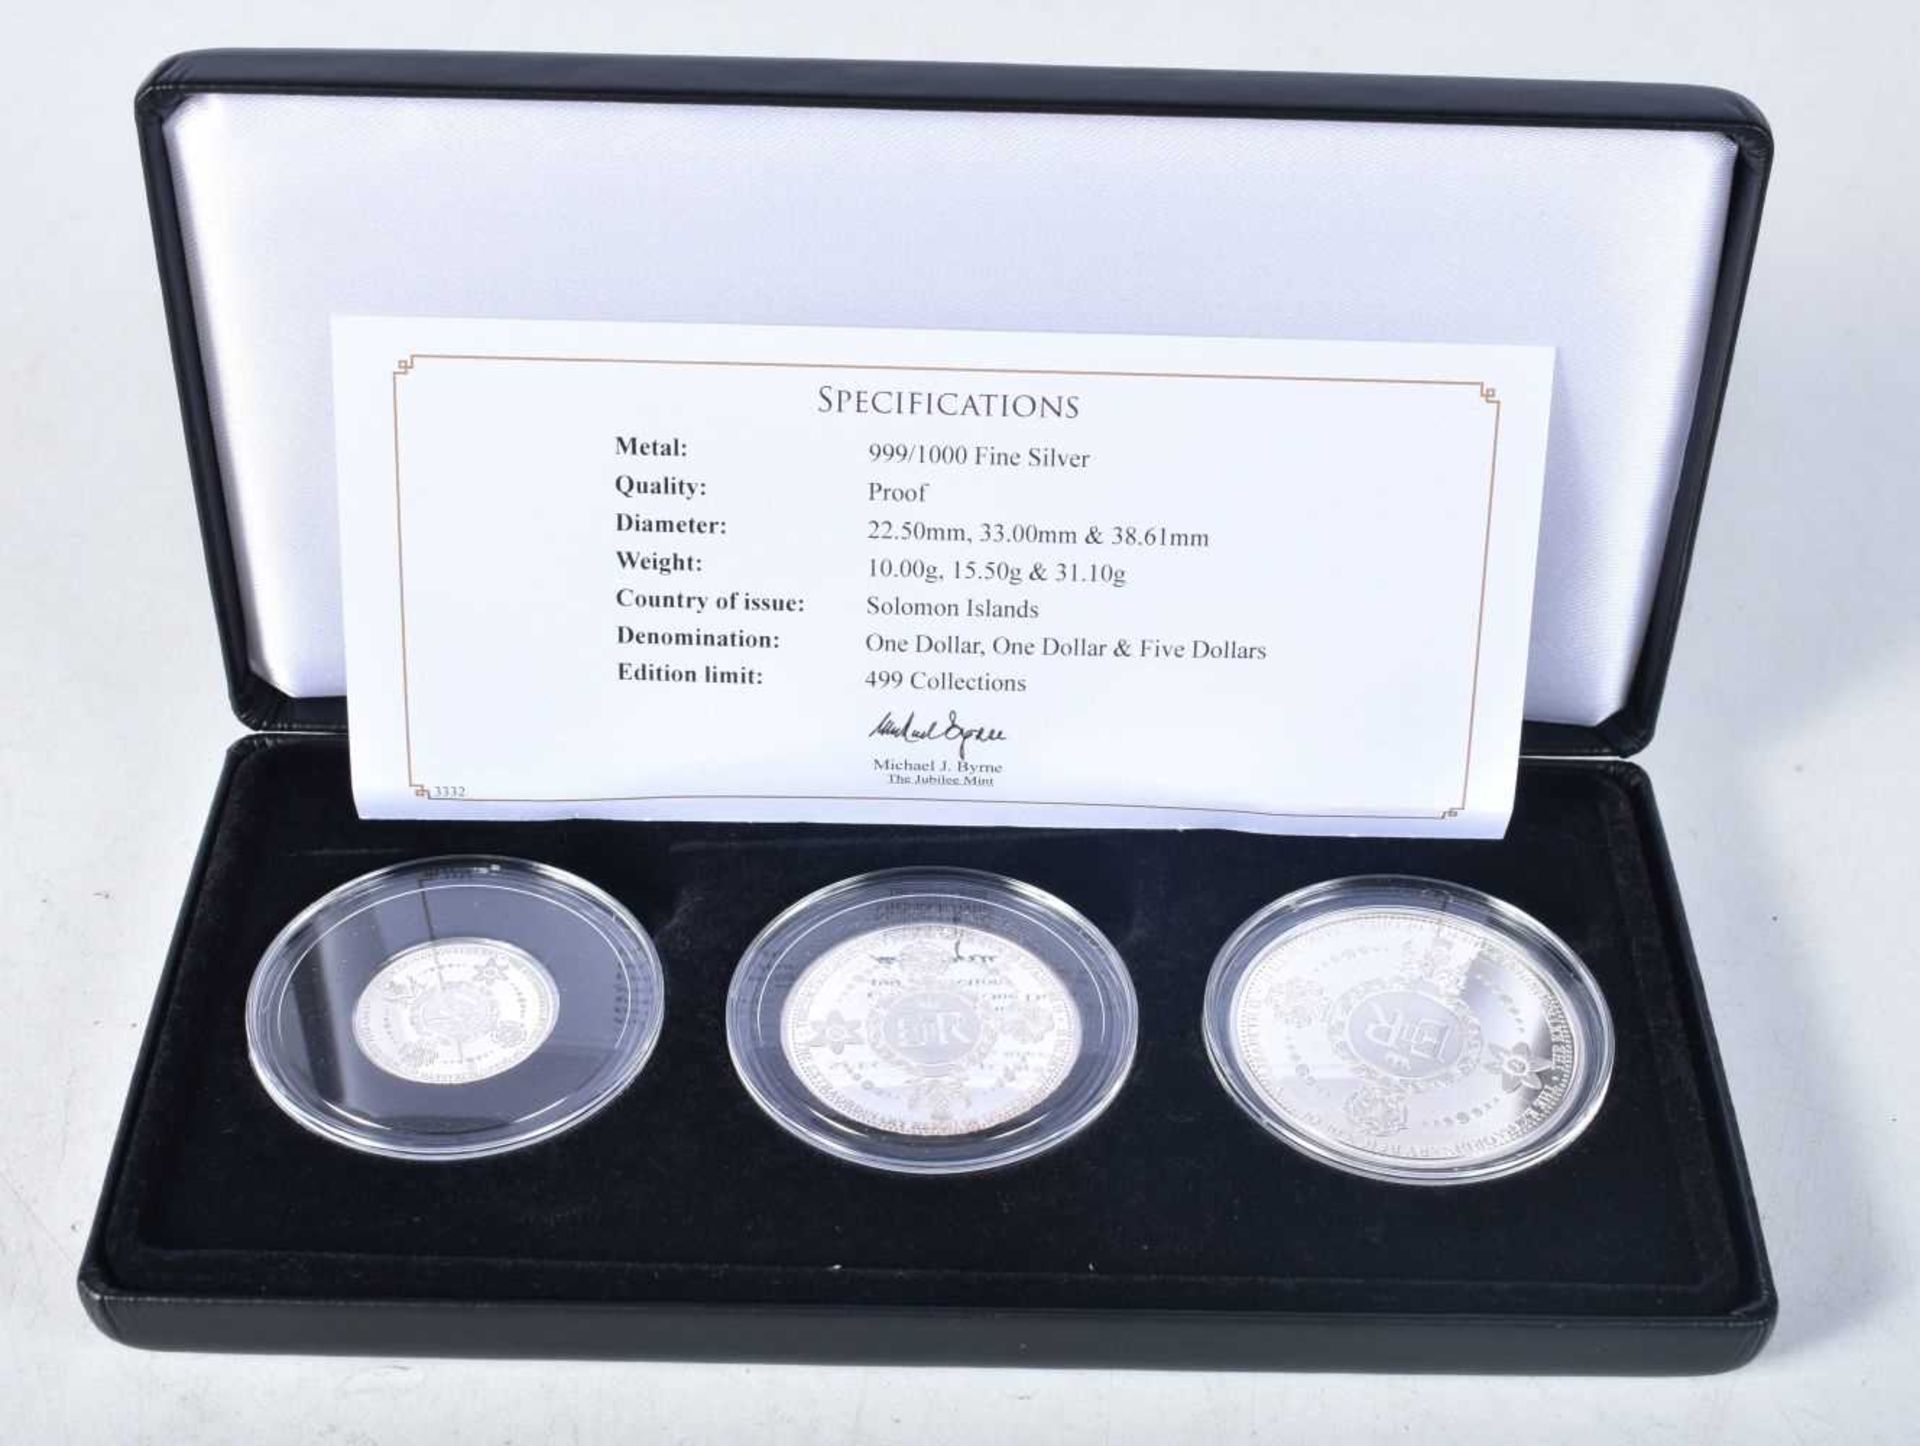 SOLOMON ISLANDS 2022 QEII PLATINUM JUBILEE SILVER PROOF THREE COIN SET, INCLUDES THE FIVE DEOLLARS